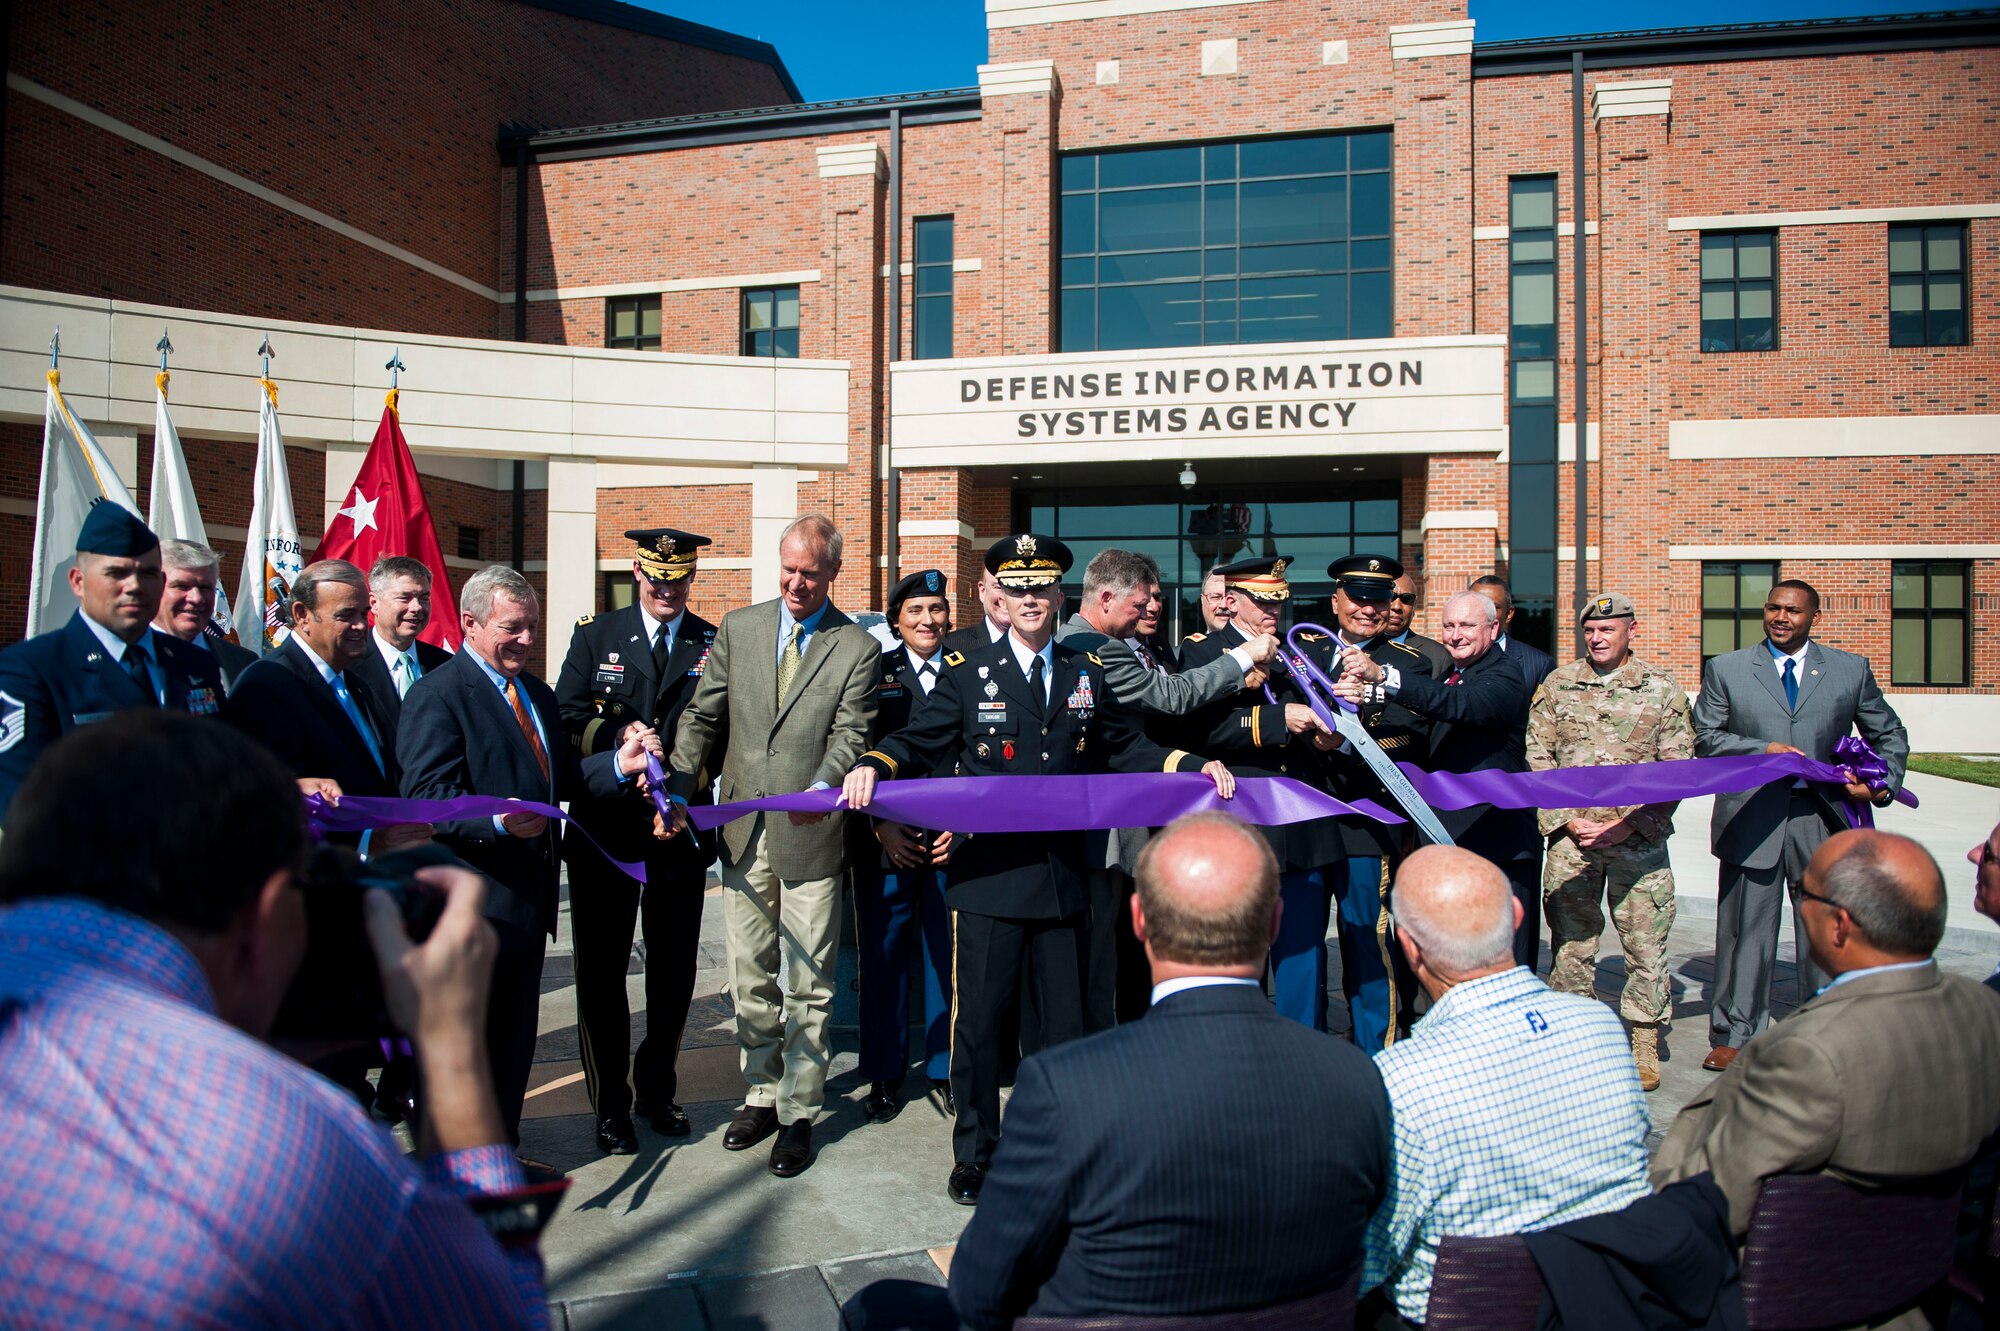 Military and state leaders cut the ribbon officially opening the new Defense Information Systems Agency compound at Scott Air Force Base, Ill., Aug. 11, 2016. The $100 million facility was completed on time and under budget. (U.S. Air Force photo by Staff Sgt. Clayton Lenhardt/Released)